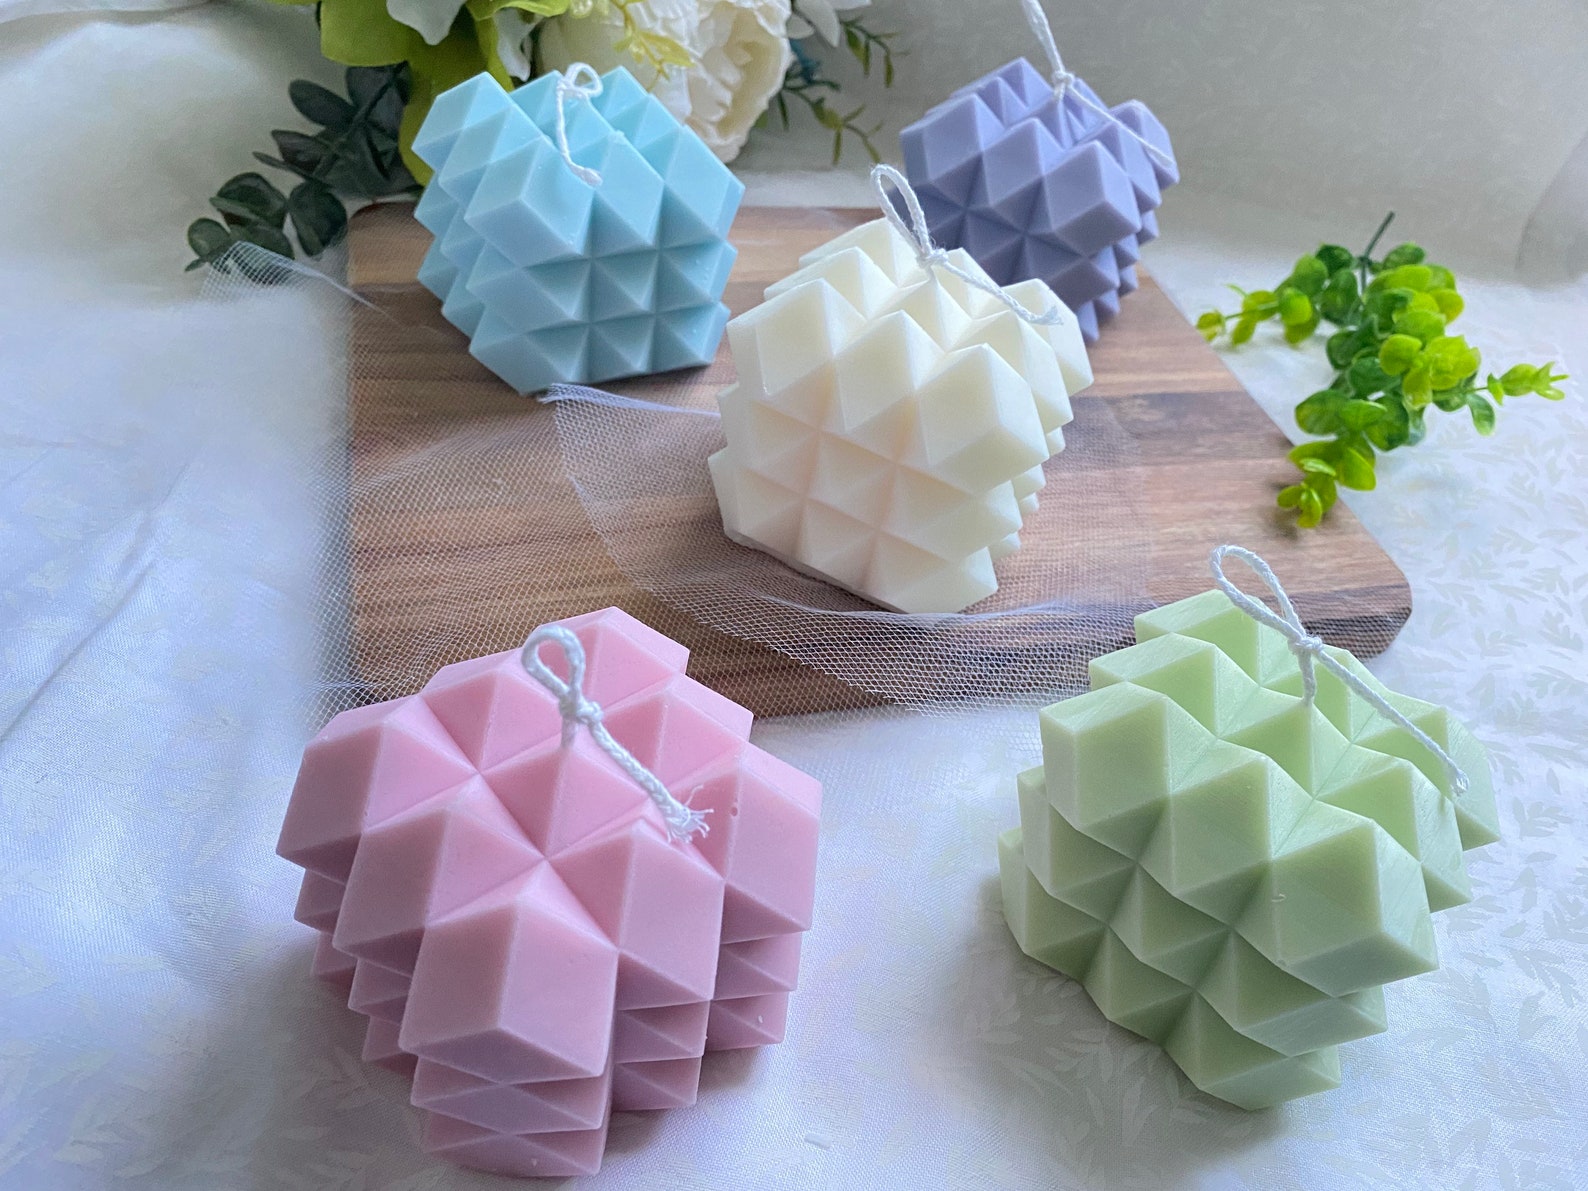 Spike Cube Sculpted Pastel Aroma soy wax Candle - Set of 5